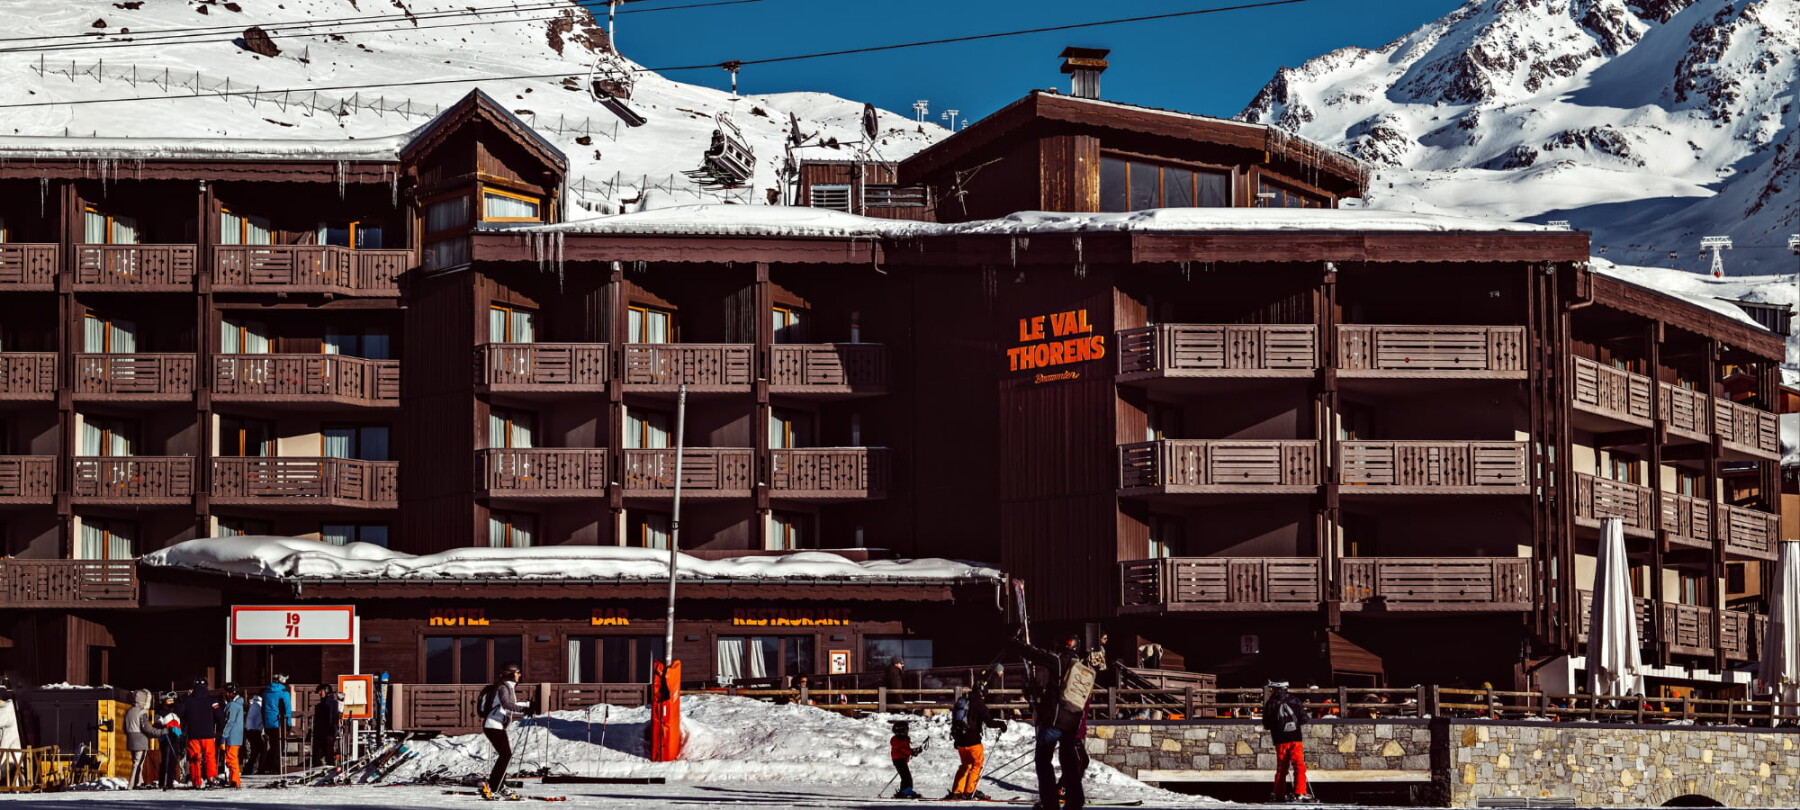 Hotel Le Val Thorens Exterior